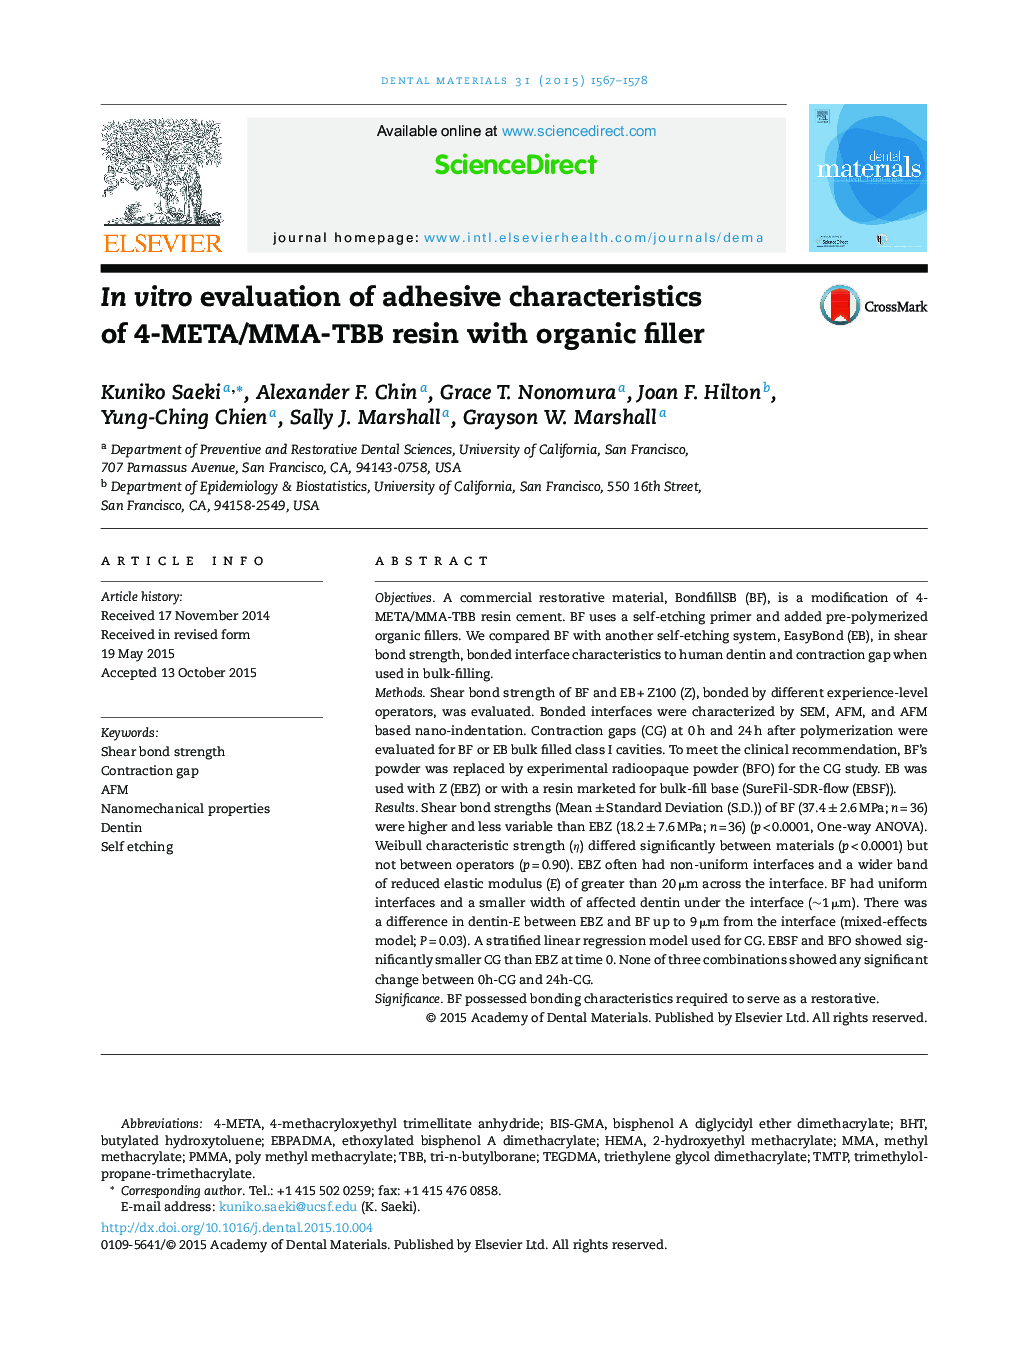 In vitro evaluation of adhesive characteristics of 4-META/MMA-TBB resin with organic filler